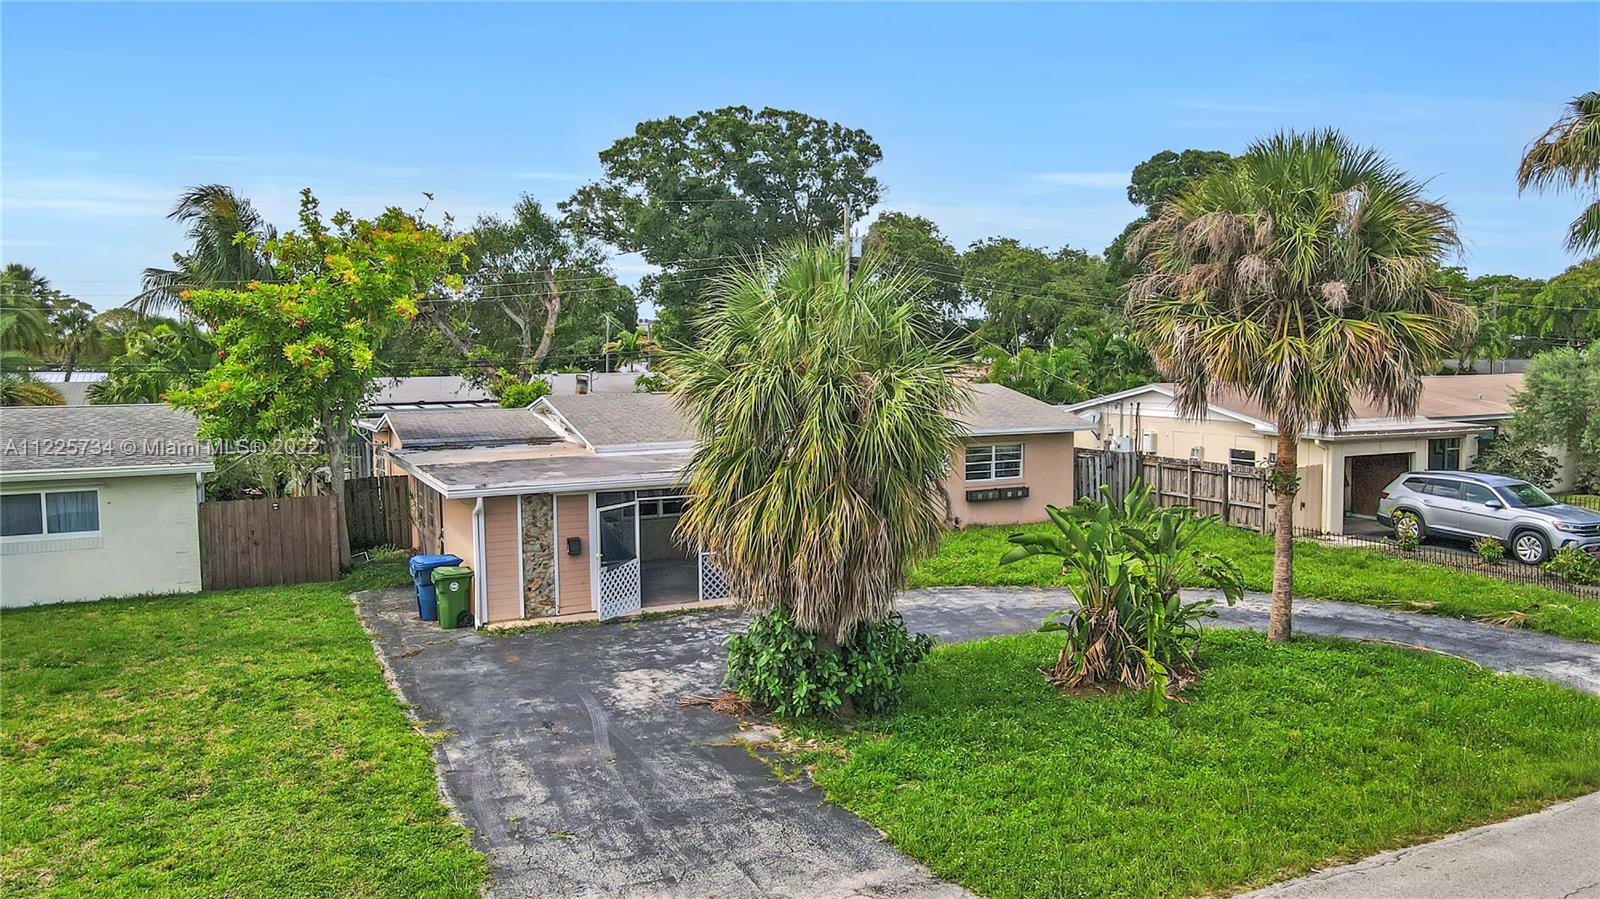 This home is currently under renovation. Located in Central Wilton Manors in a non-HOA neighborhood and within walking distance of Wilton Drive. A large footprint (1,896 SF+ under air) offers many possibilities for a custom design and layout of a buyer's preference. Currently configured as a 4/2; however, an excellent opportunity to re-design into a split floor plan/ open concept home. There is a large circular driveway, screened-in front porch, and room for a pool in the backyard. Home is being sold as-is, cash transactions only, can obtain plans submitted to the city for permitting upon request.